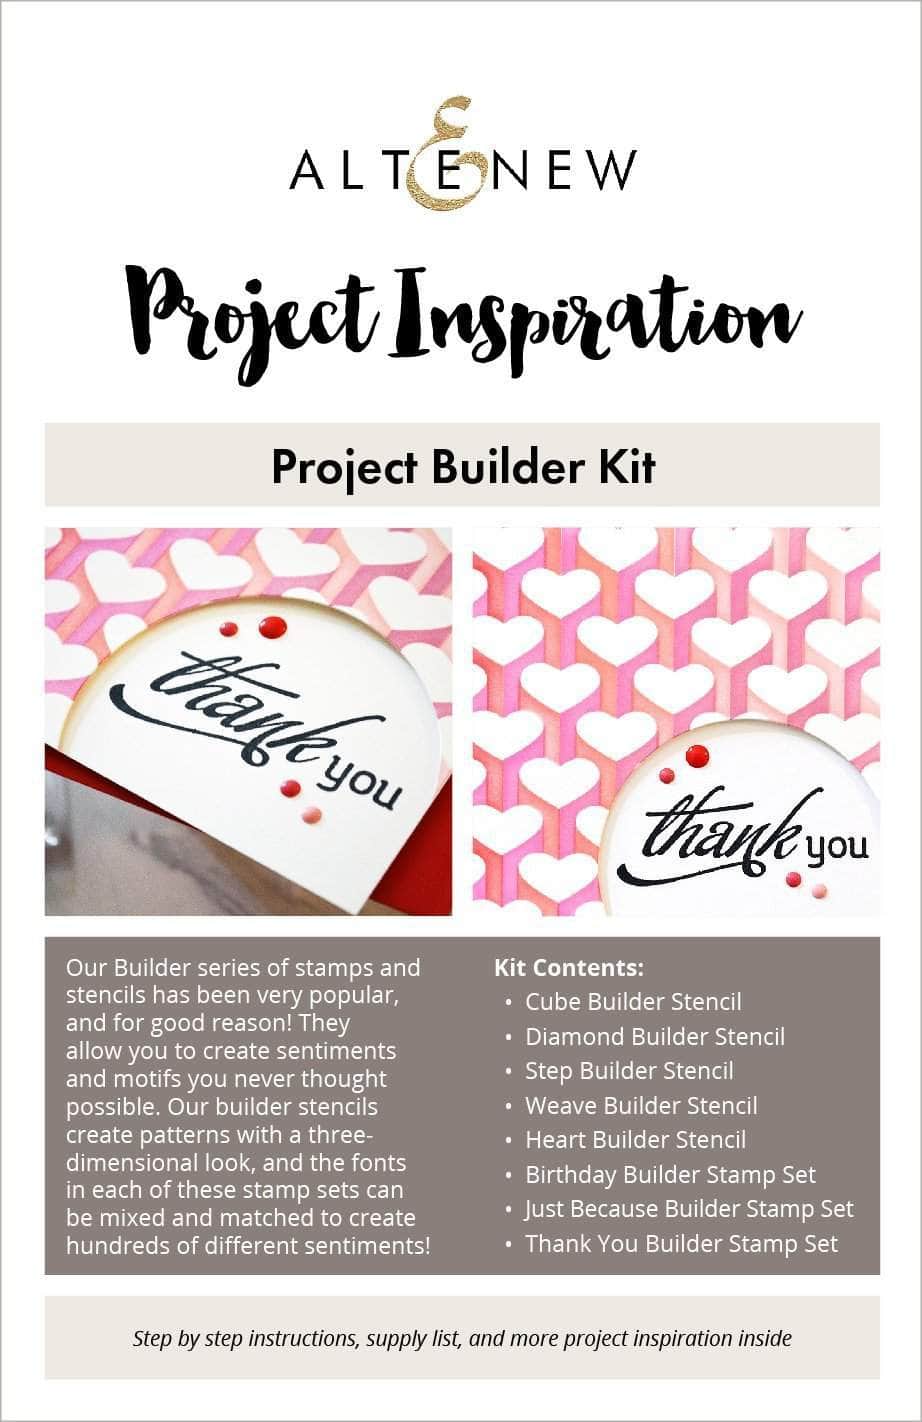 Printed Media Project Builder Kit Inspiration Guide